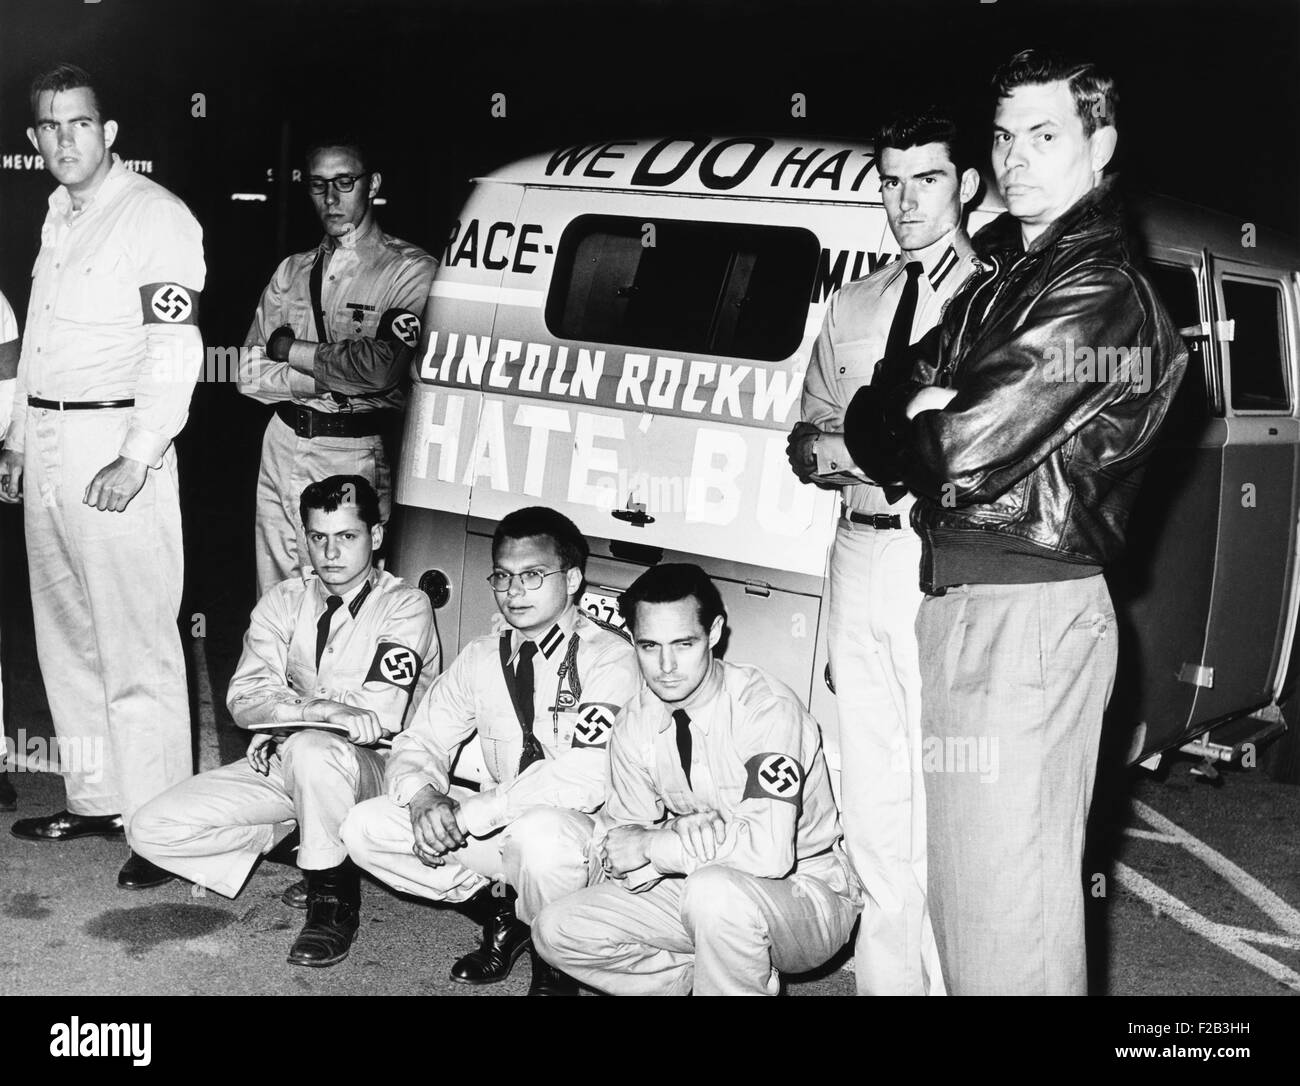 George Lincoln Rockwell (right) poses with the American Nazi party 'Hate Bus', May 22, 1961. The van carried 12 party members from Virginia to New Orleans, to add their radical right resistance to the Civil Rights Movement. On the bus in big red letters were slogans saying, ‘We do hate race mixing’ and ‘We hate Jew Communism’. - (CSU 2015 6 206) Stock Photo